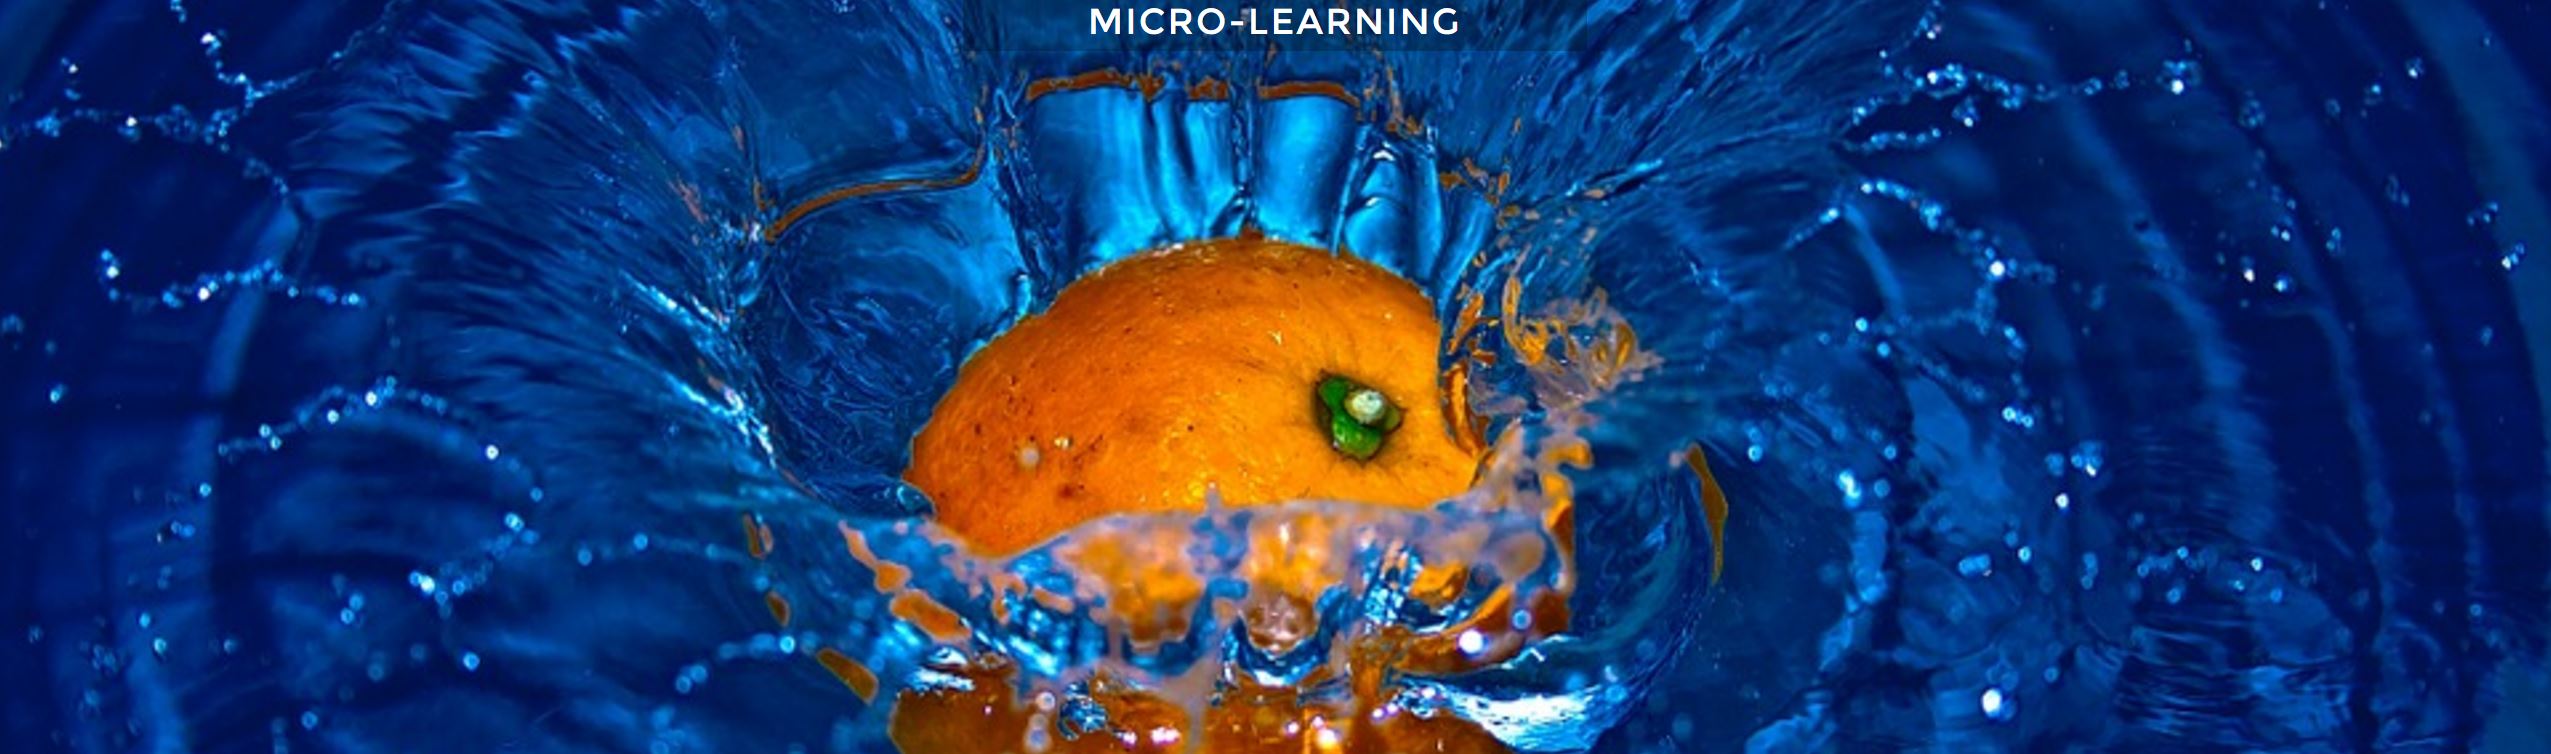 Using Technology to Support Micro-Learning Inside and Outside the Classroom